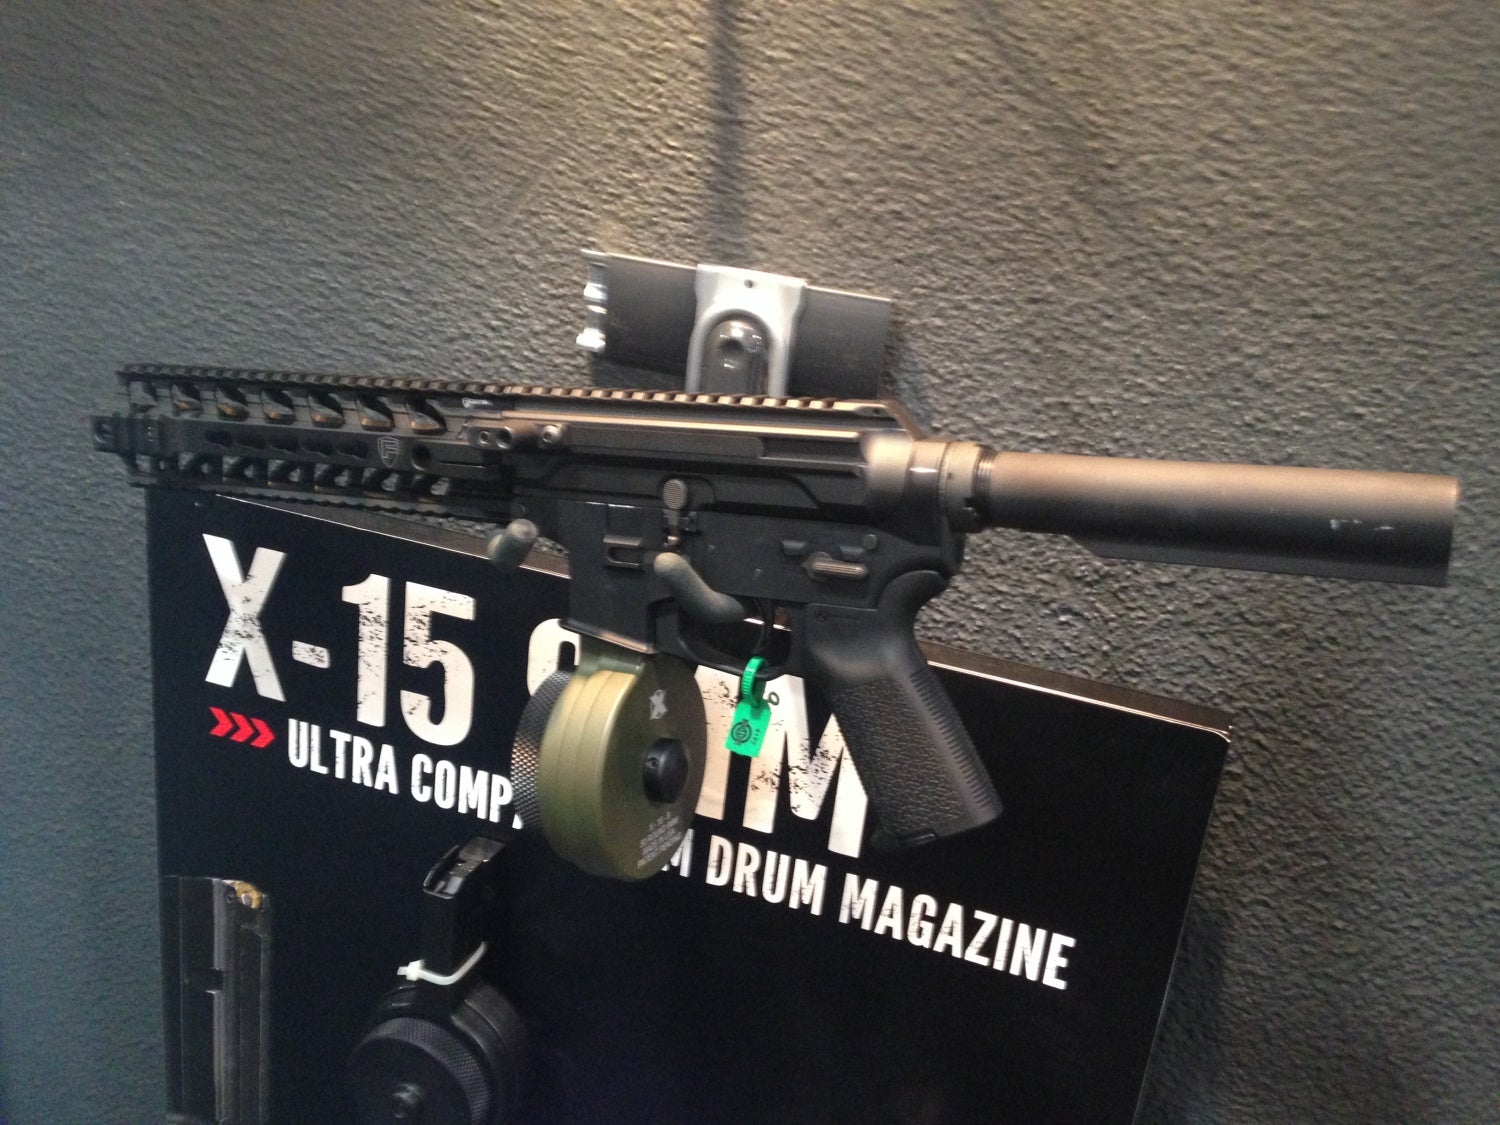 X-Products is making a 50 rd drum for colt magazine ARs. 